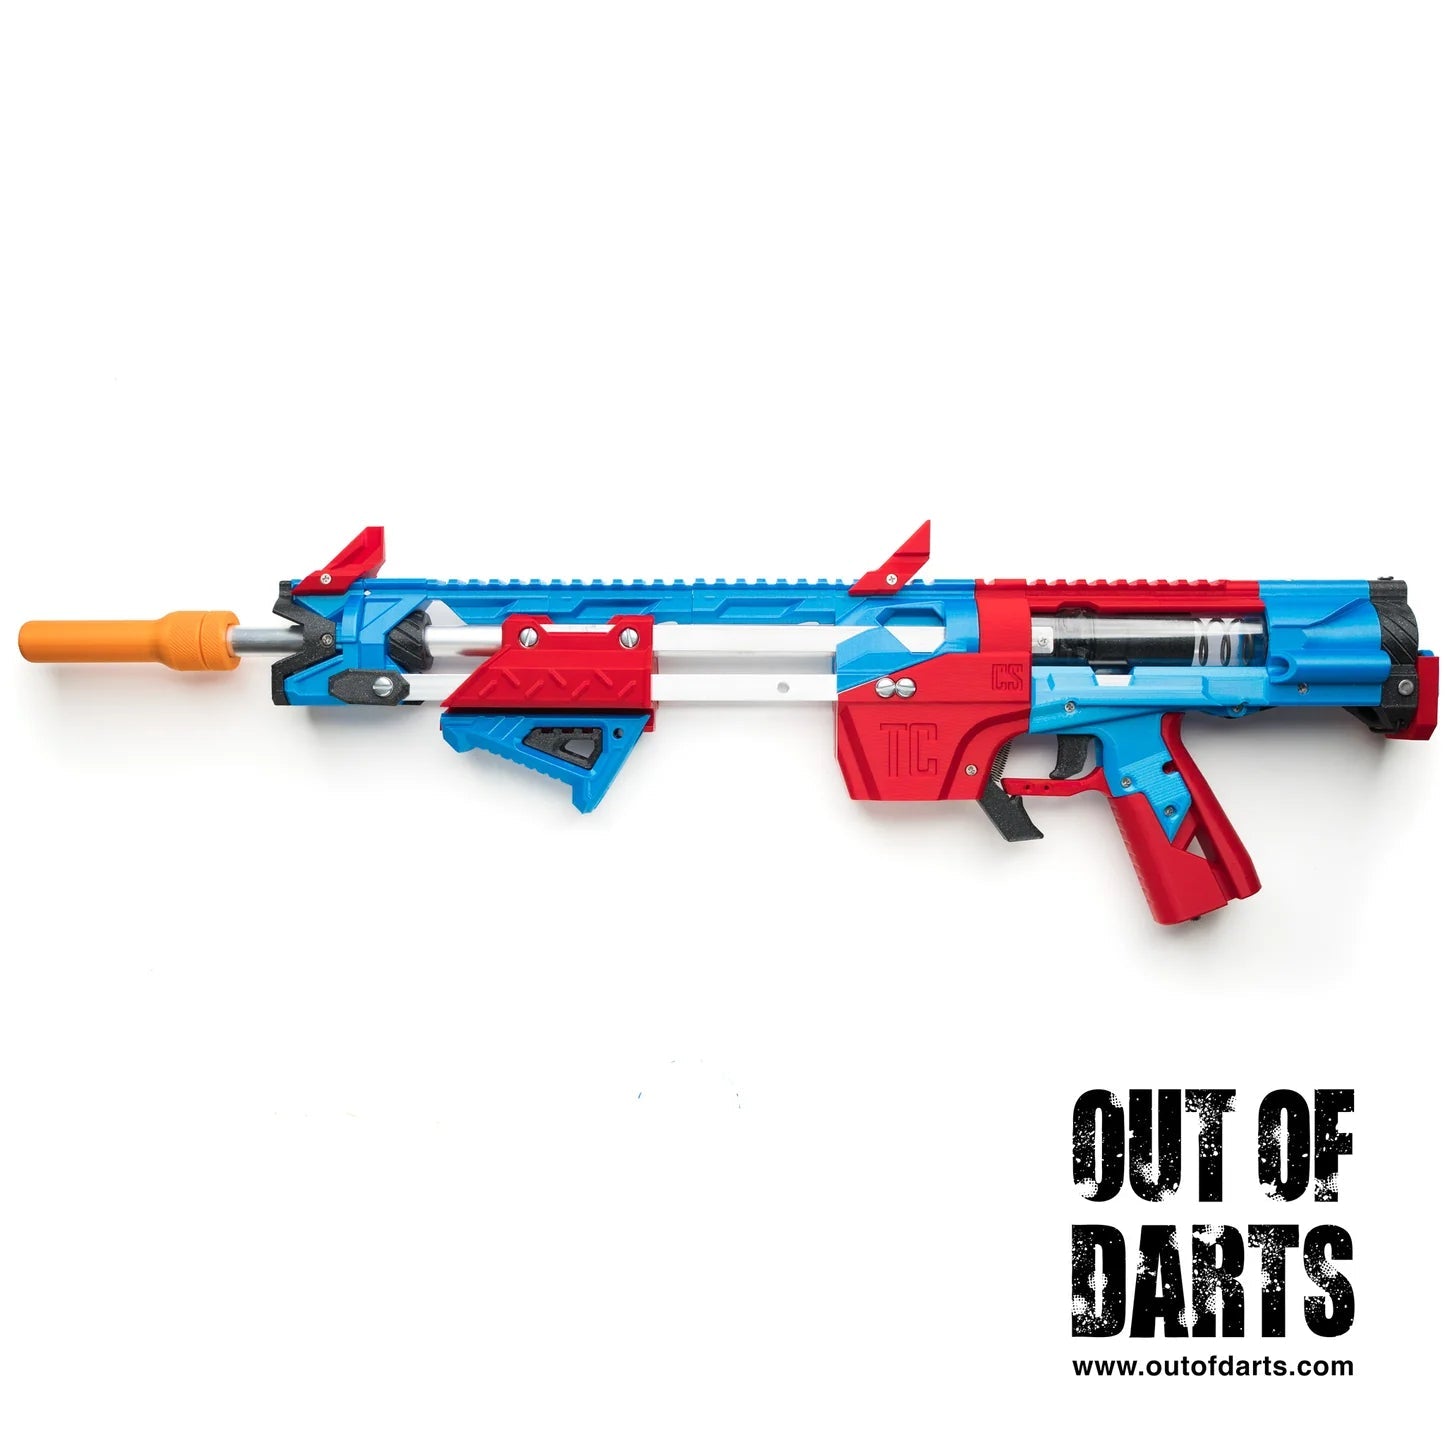 Talon Claw 4 Dart Blaster by Captain Slug - Hardware Kit - with Bonus Spring - 14in - West3D 3D Printing Supplies - Out of Darts